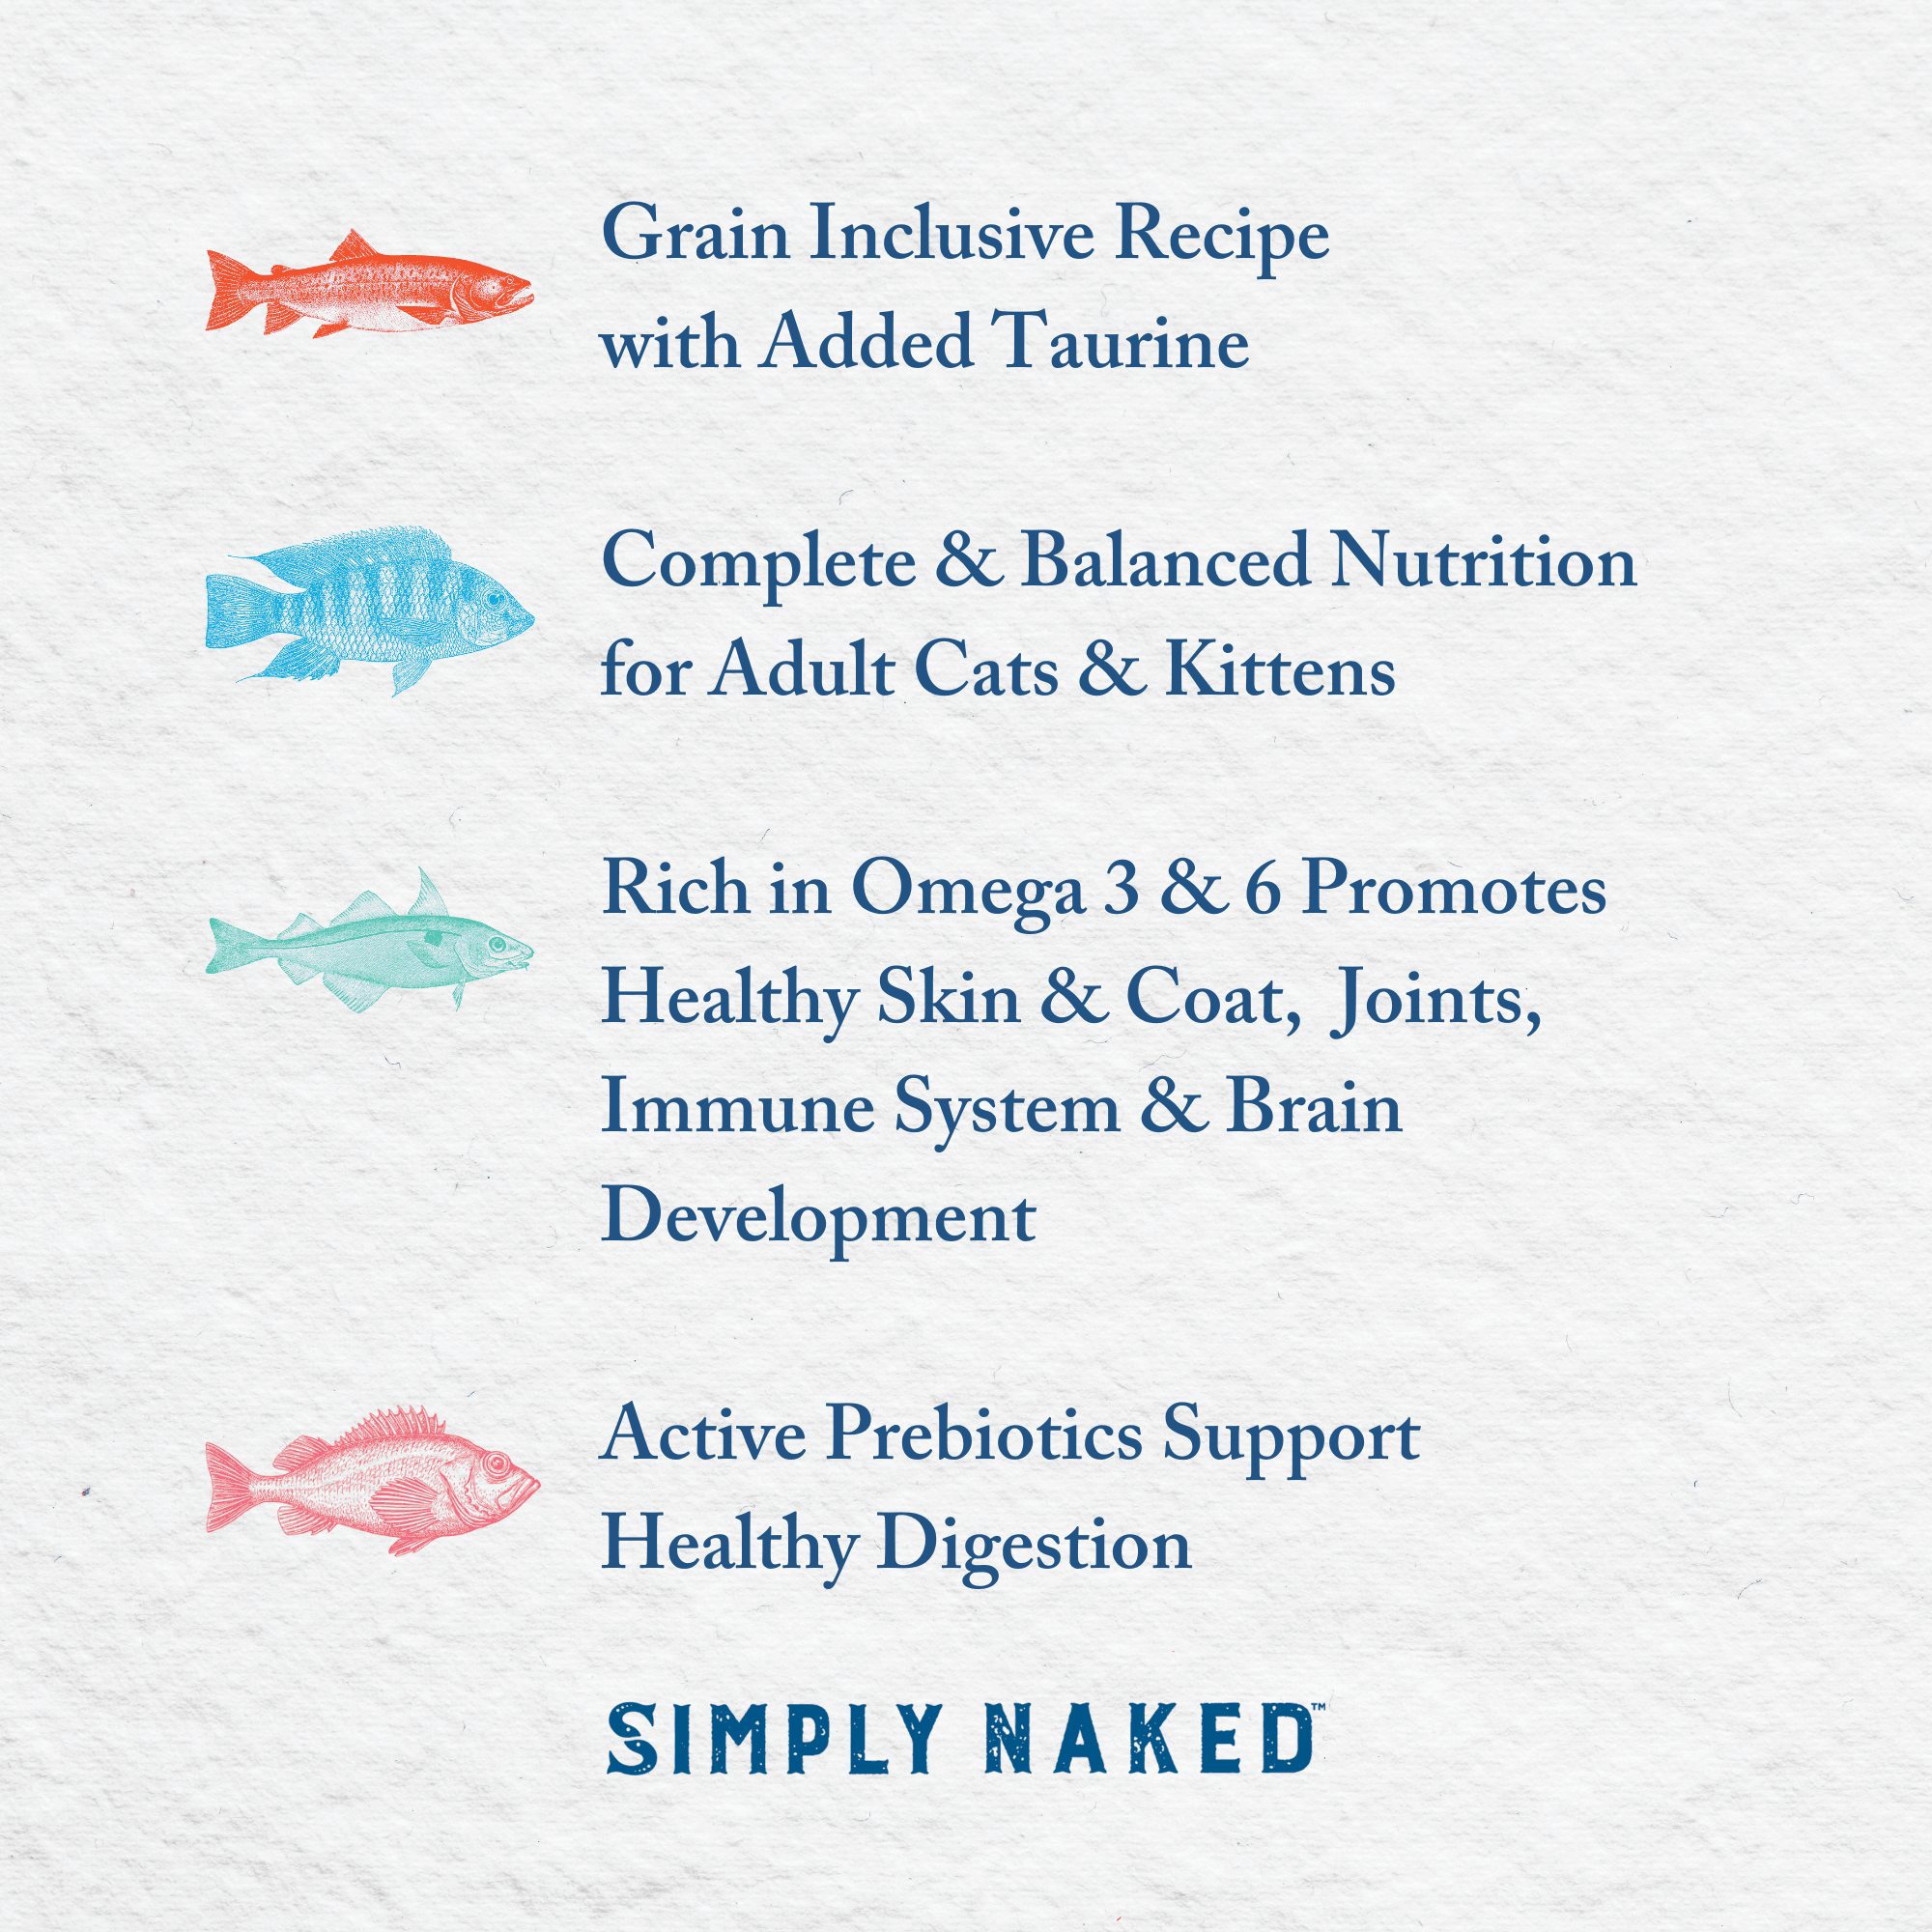 Wild Acadian Redfish Dinner for Cats - Simply Naked Fish Based Dog Food & Cat Food